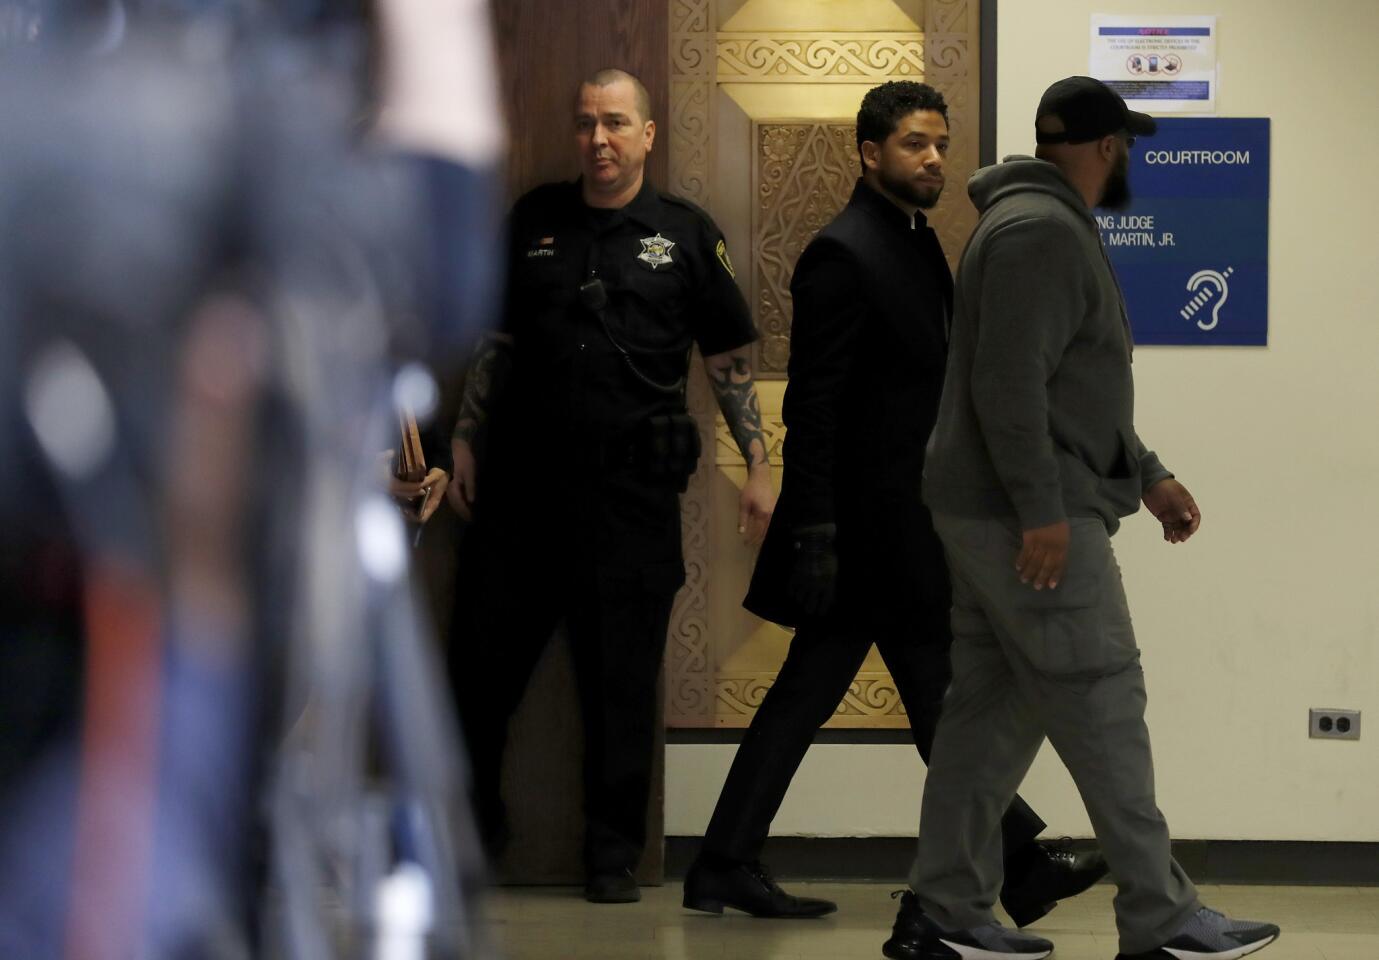 Actor Jussie Smollett exits courtroom 101 into the hallway inside the Leighton Criminal Court Building following an emergency hearing for his disorderly conduct charges, March 26, 2019.